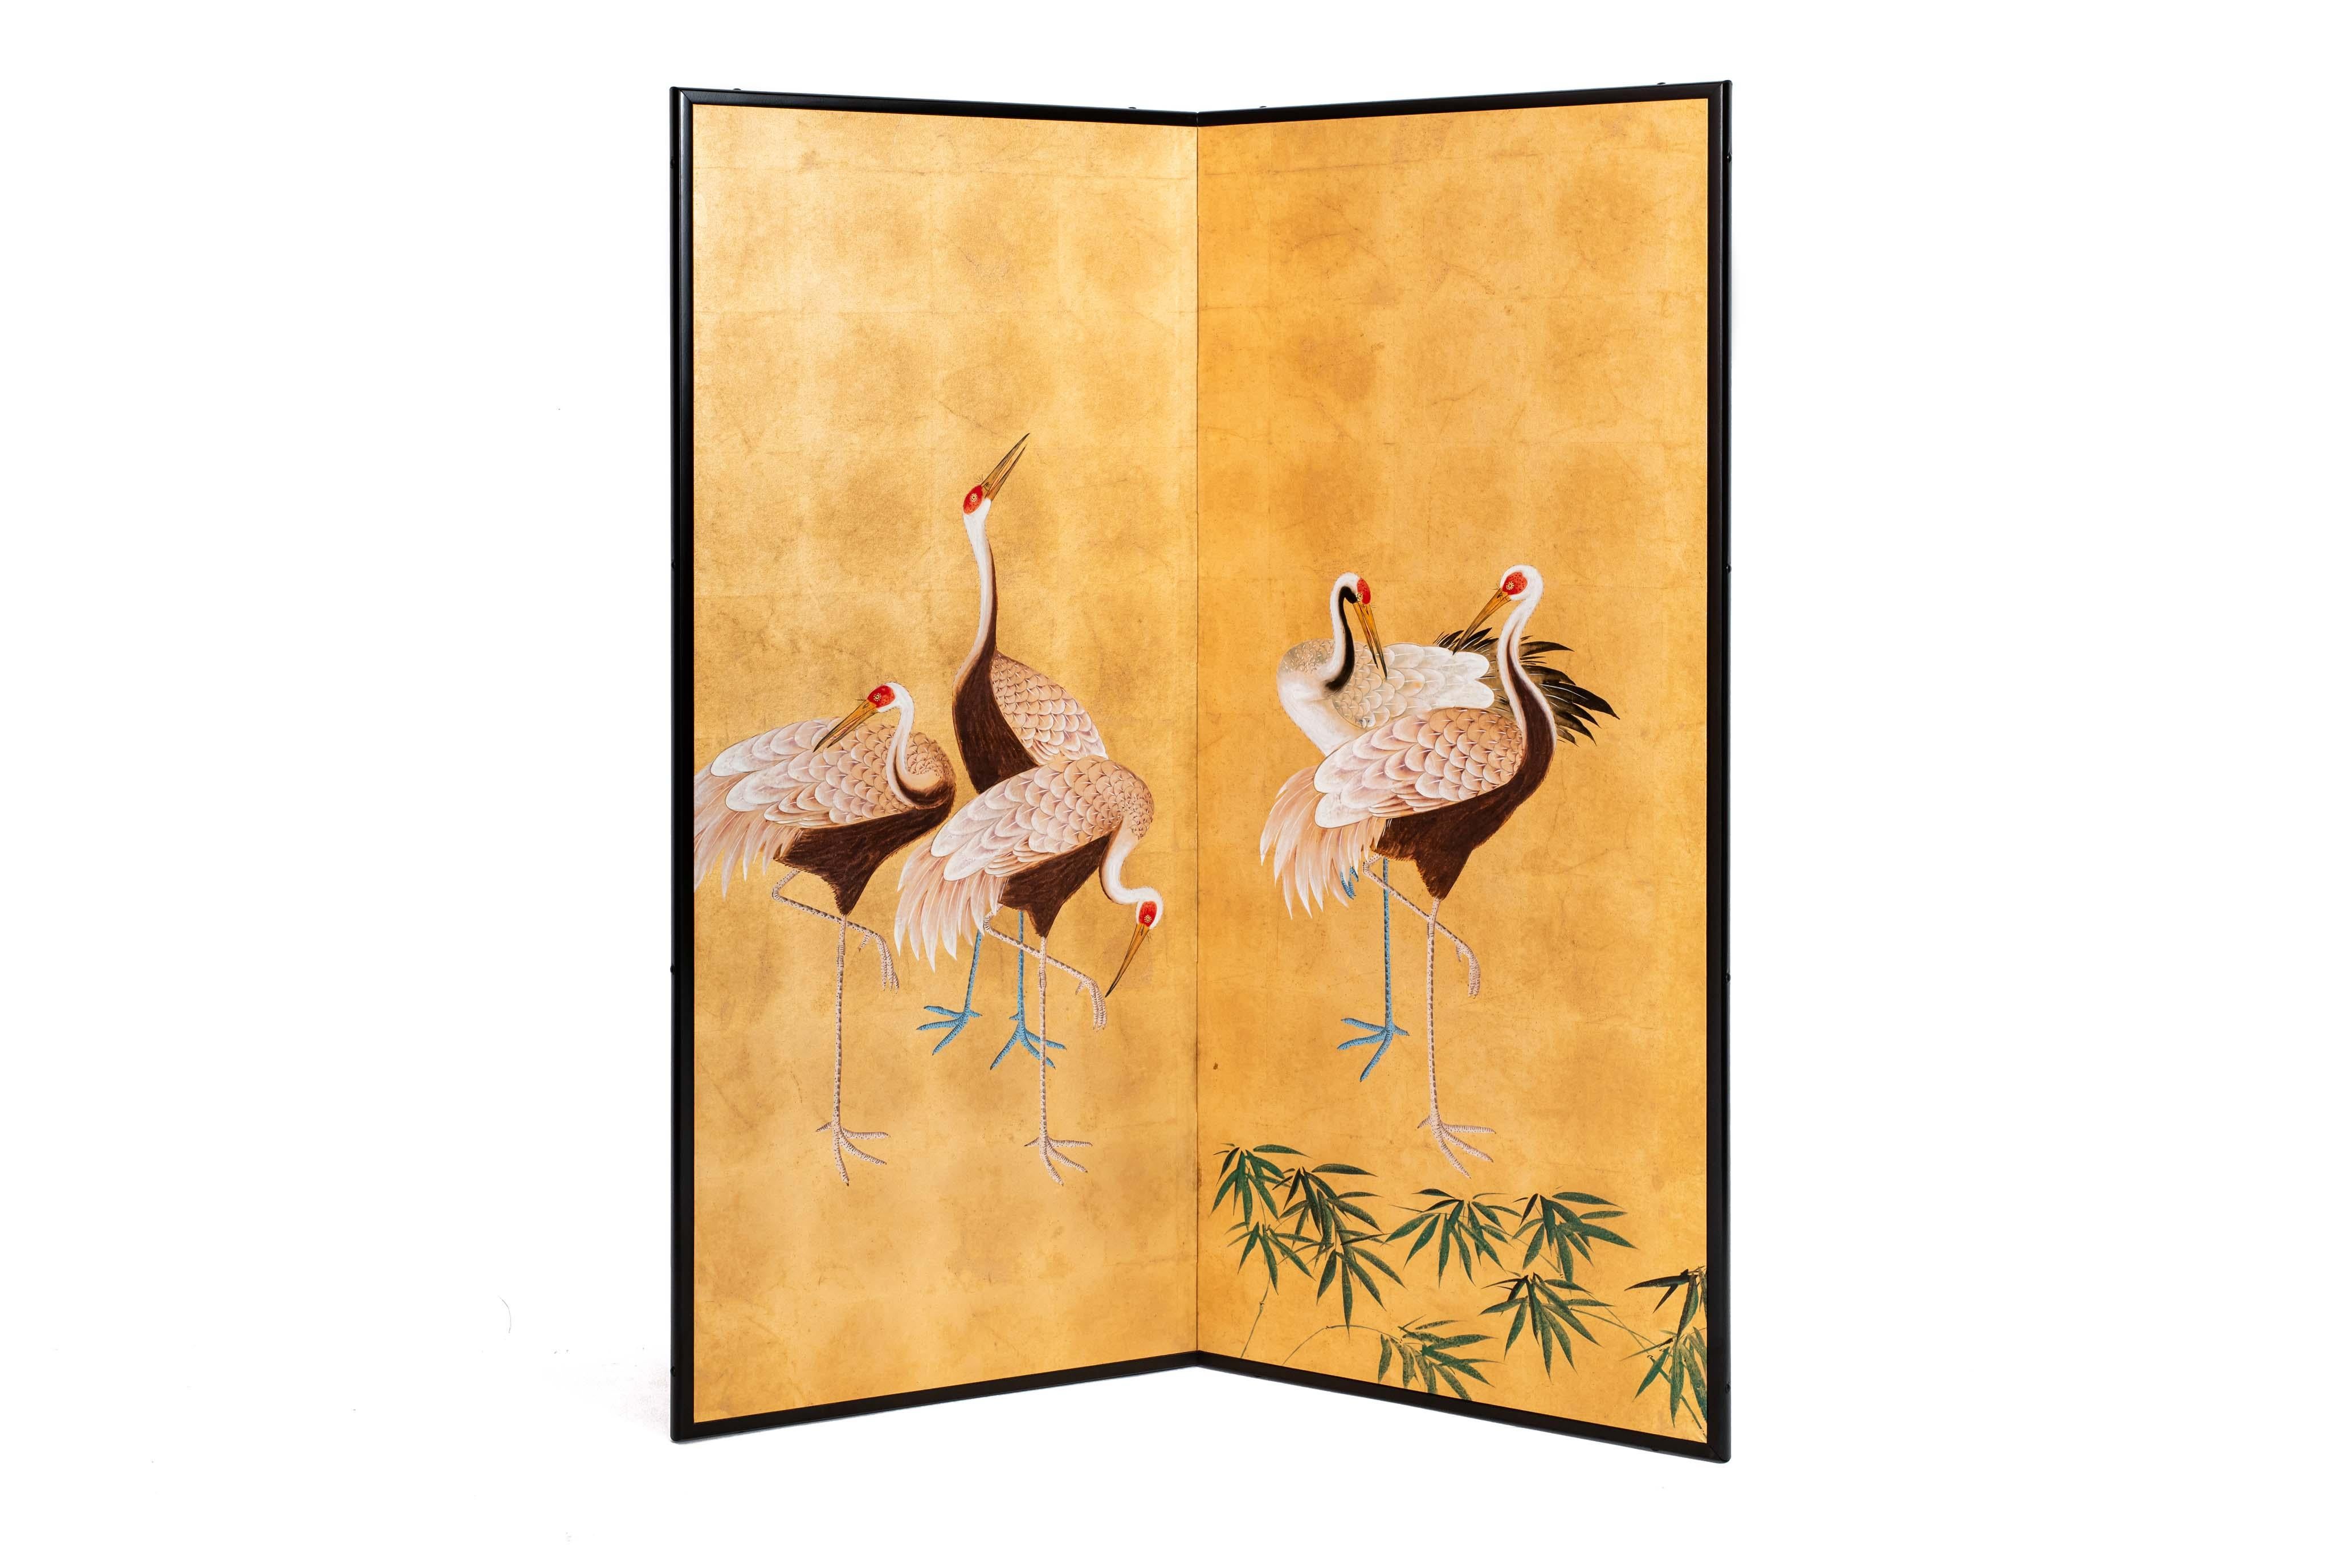 The standing cranes painting of this two-panel screen is hand-painted in watercolor, on squares of gold leaf which are applied by hand to the paper base over carefully jointed wooden lattice frames. Lacquer rails are then applied to the perimeter to